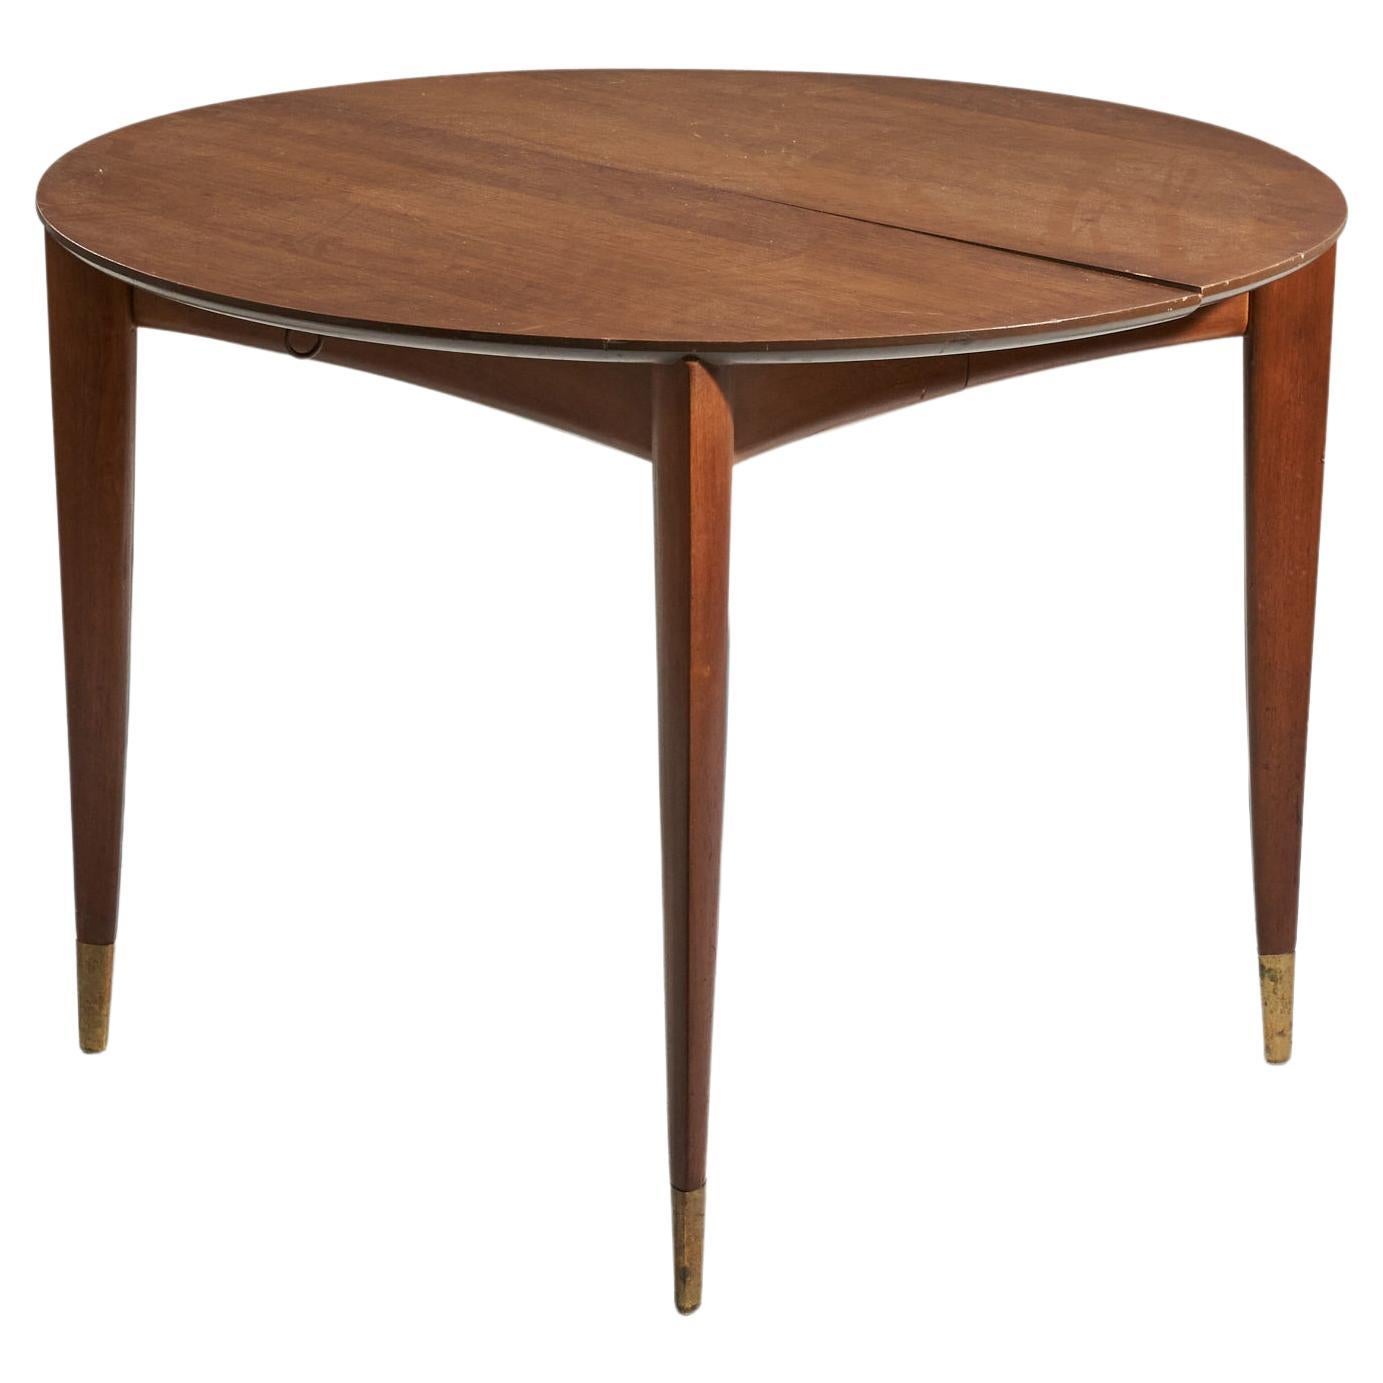 Gio Ponti, Dining Table, Walnut, Brass, Singer & Sons, United States, 1950s